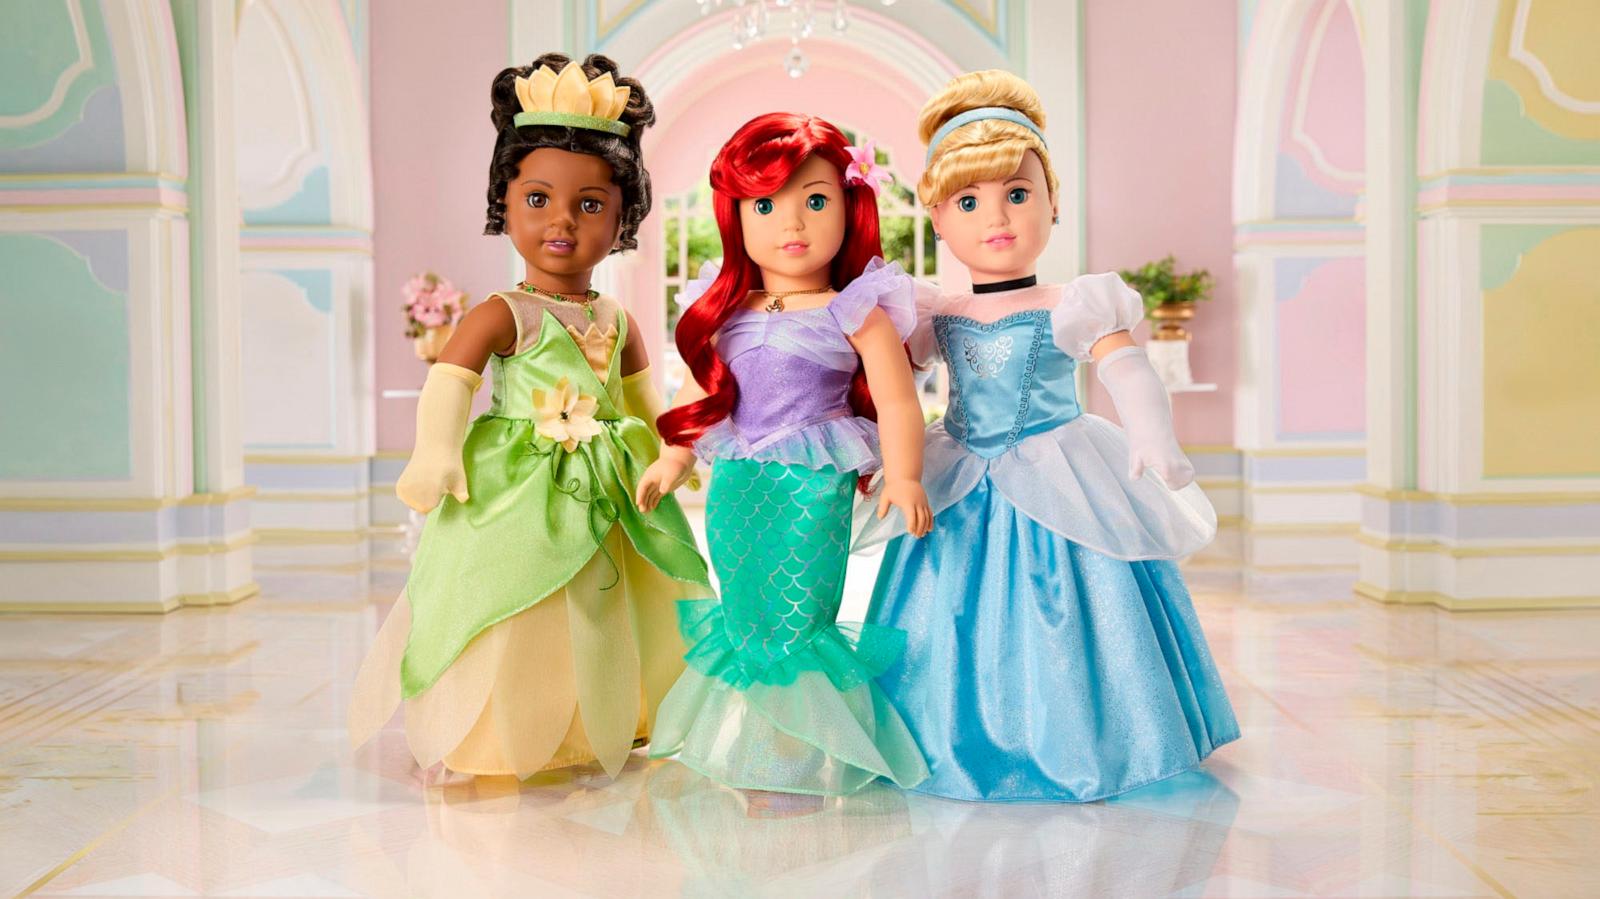 What can modern girls learn from Disney princesses?